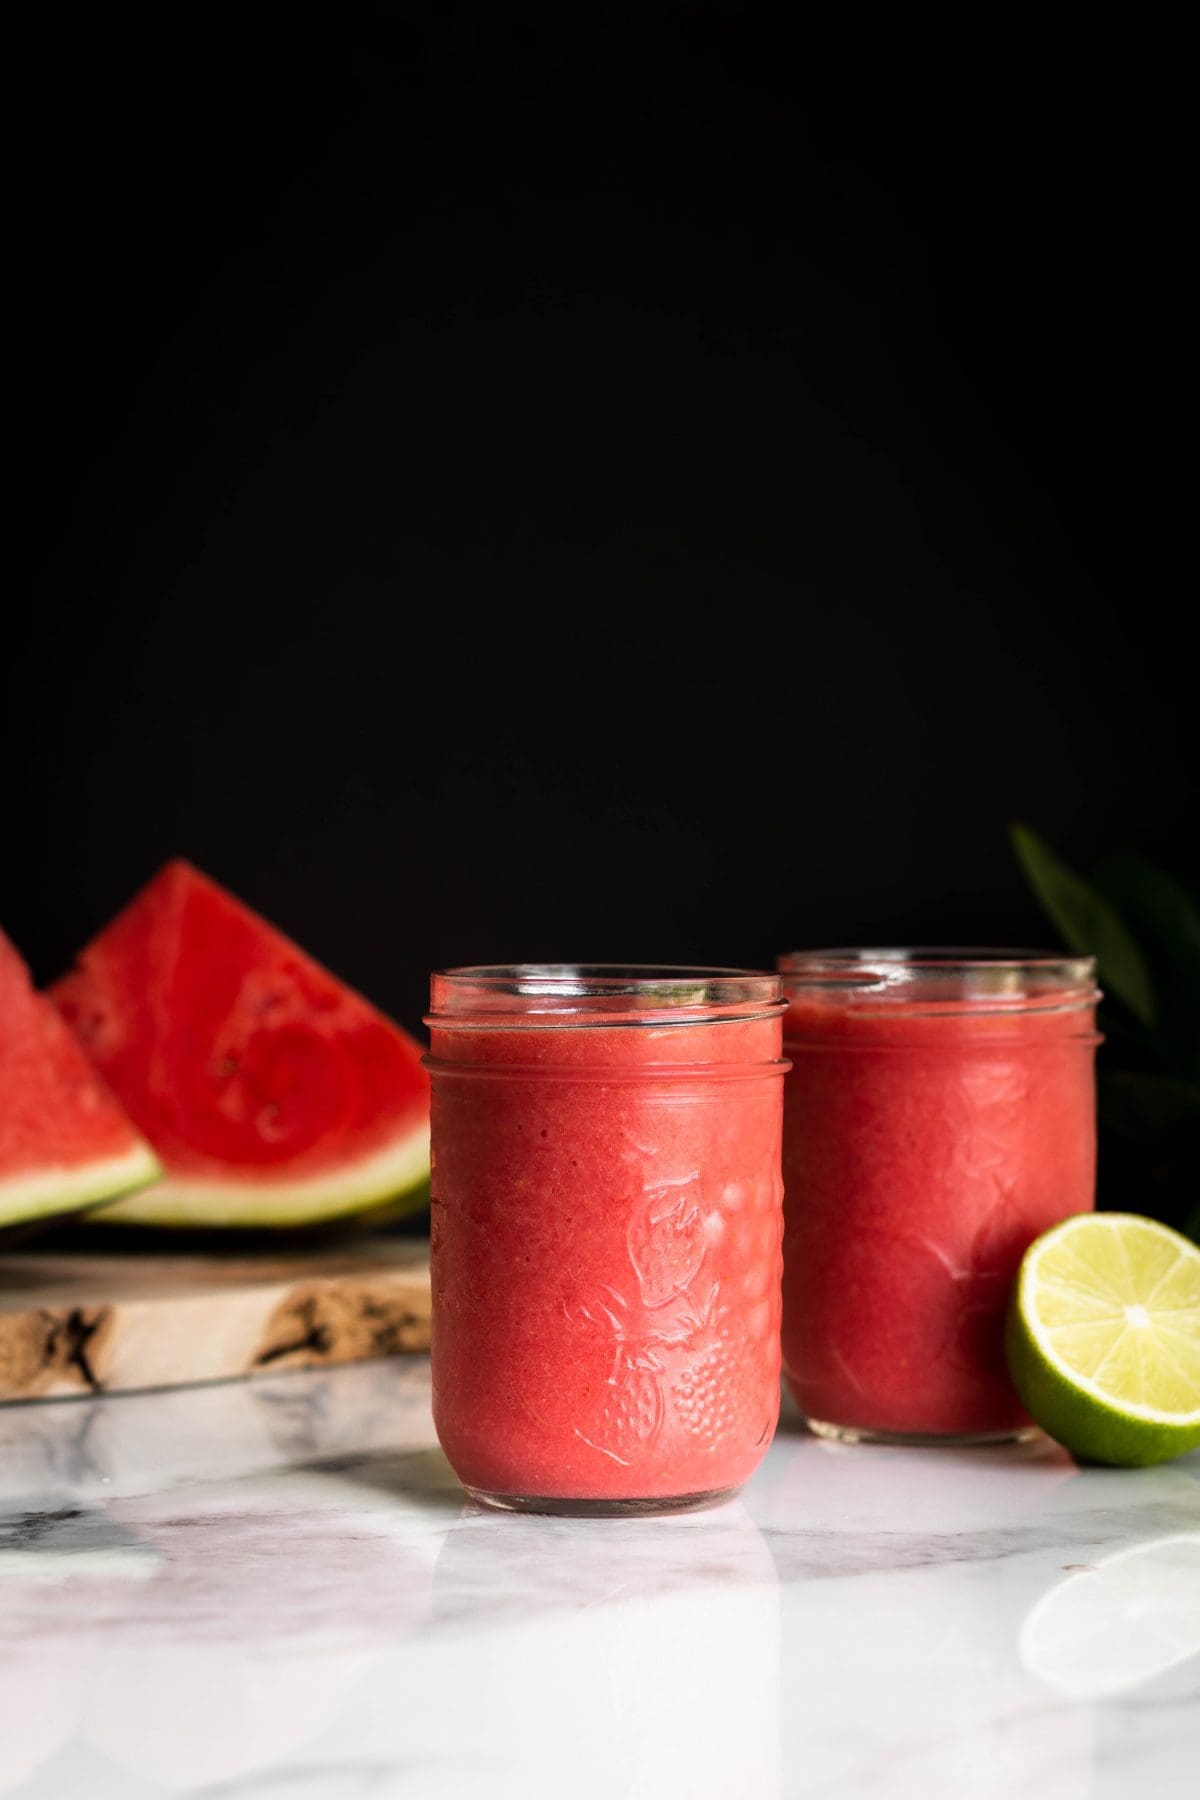 watermelon strawberry lime smoothie seen from the side